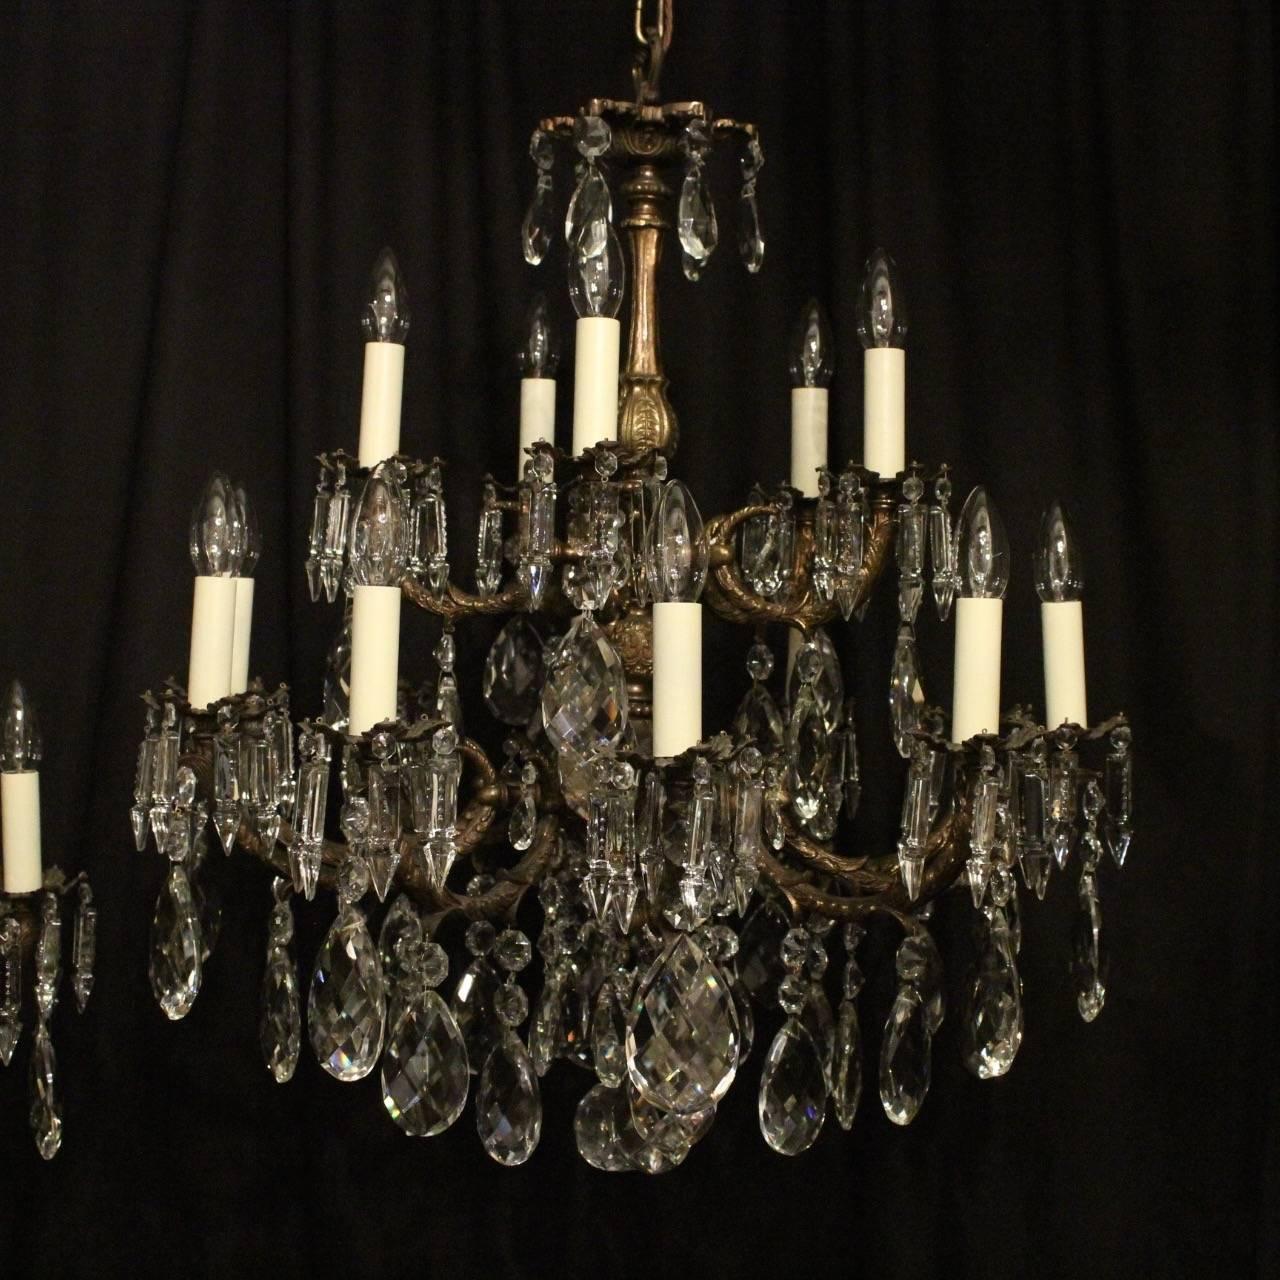 An Italian pair of gilded cast brass and crystal fifteen-light double tiered antique chandeliers, the scrolling arms with ornate cast bobeche drip pans, issuing from a foliated cast baluster central column with foliated canopy and decorated overall